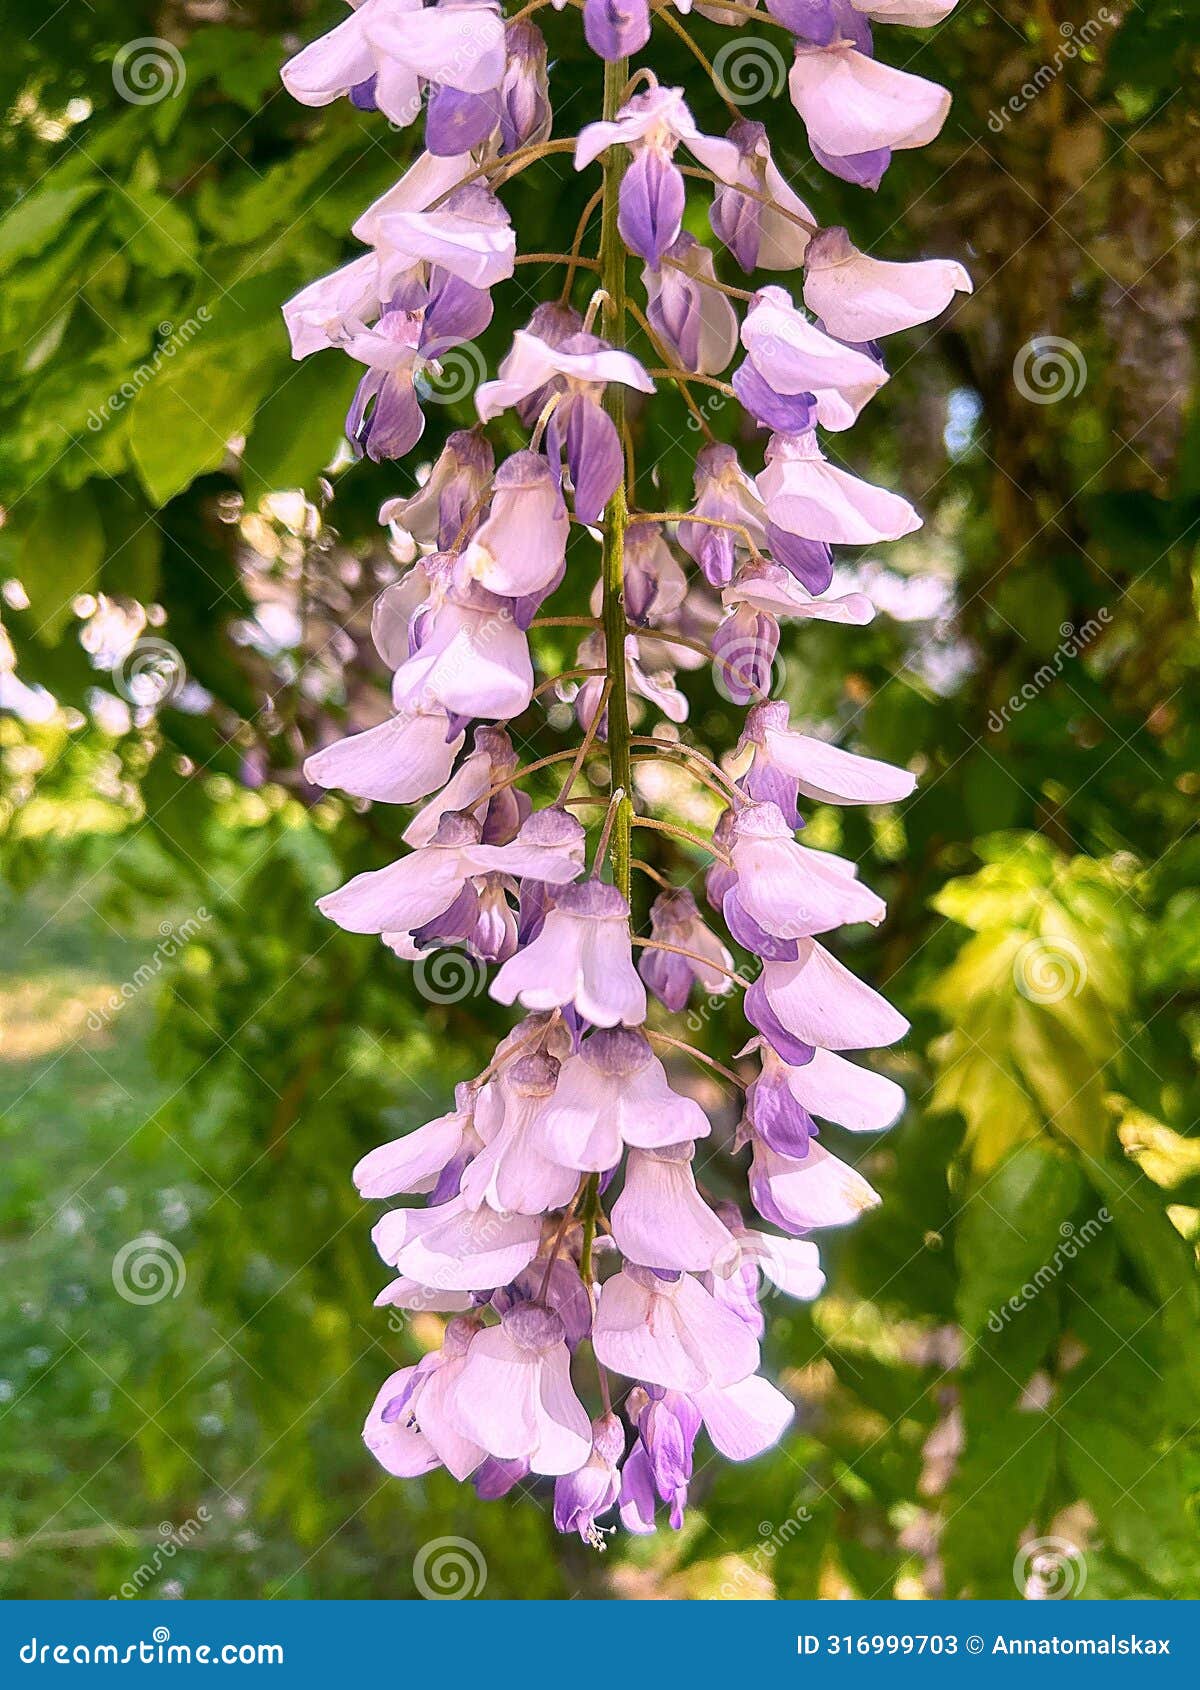 pink wisteria, spring flowers, hanging flower rhizomes, long hanging wisteria buds, may flowers